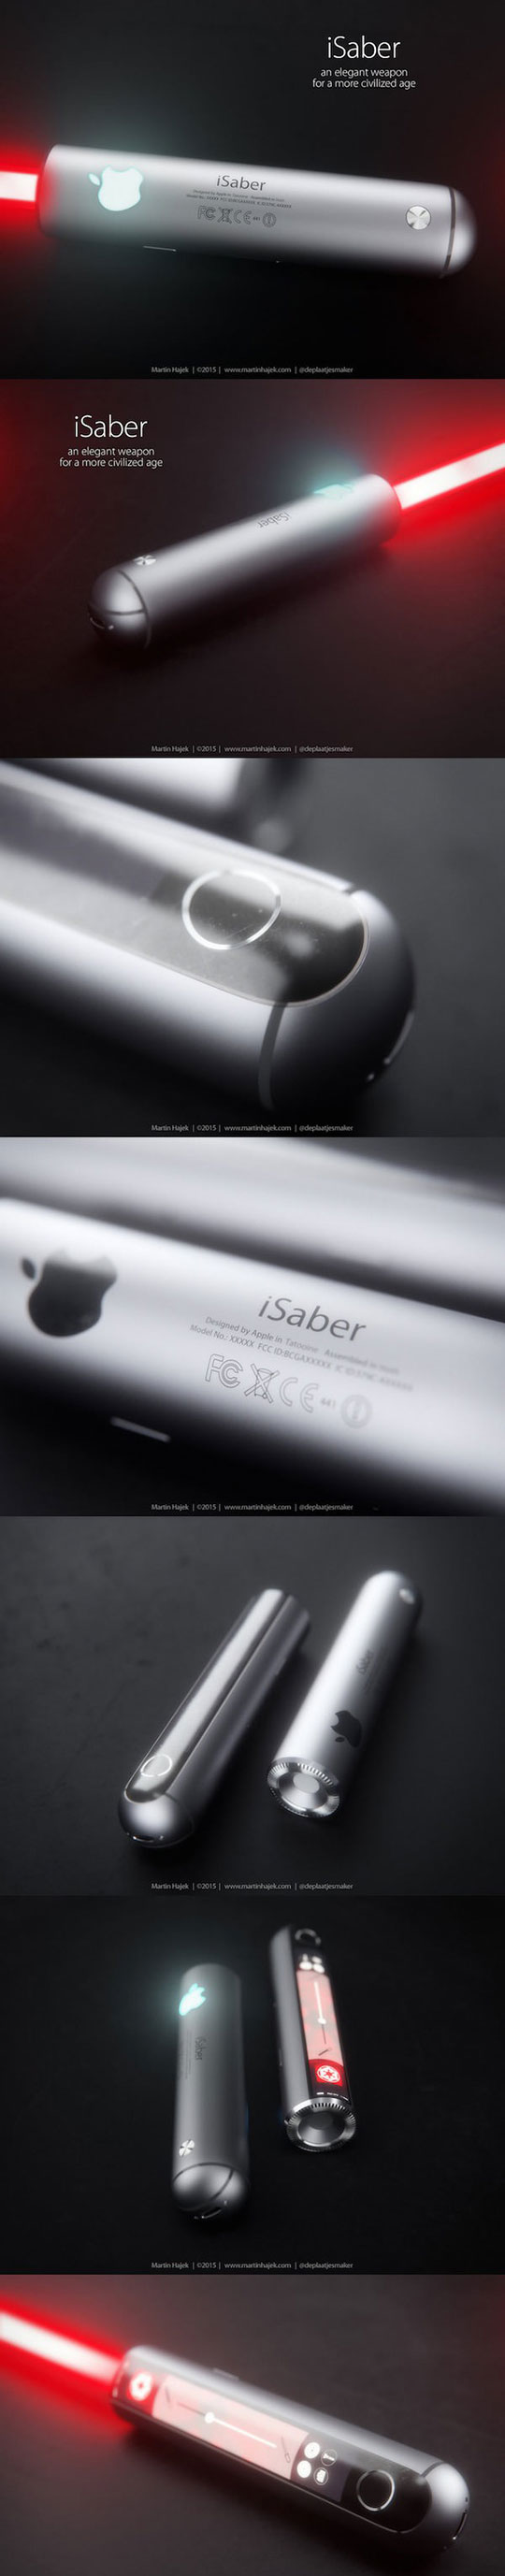 This Is What The iSaber Would Look Like If Apple Made Lightsabers